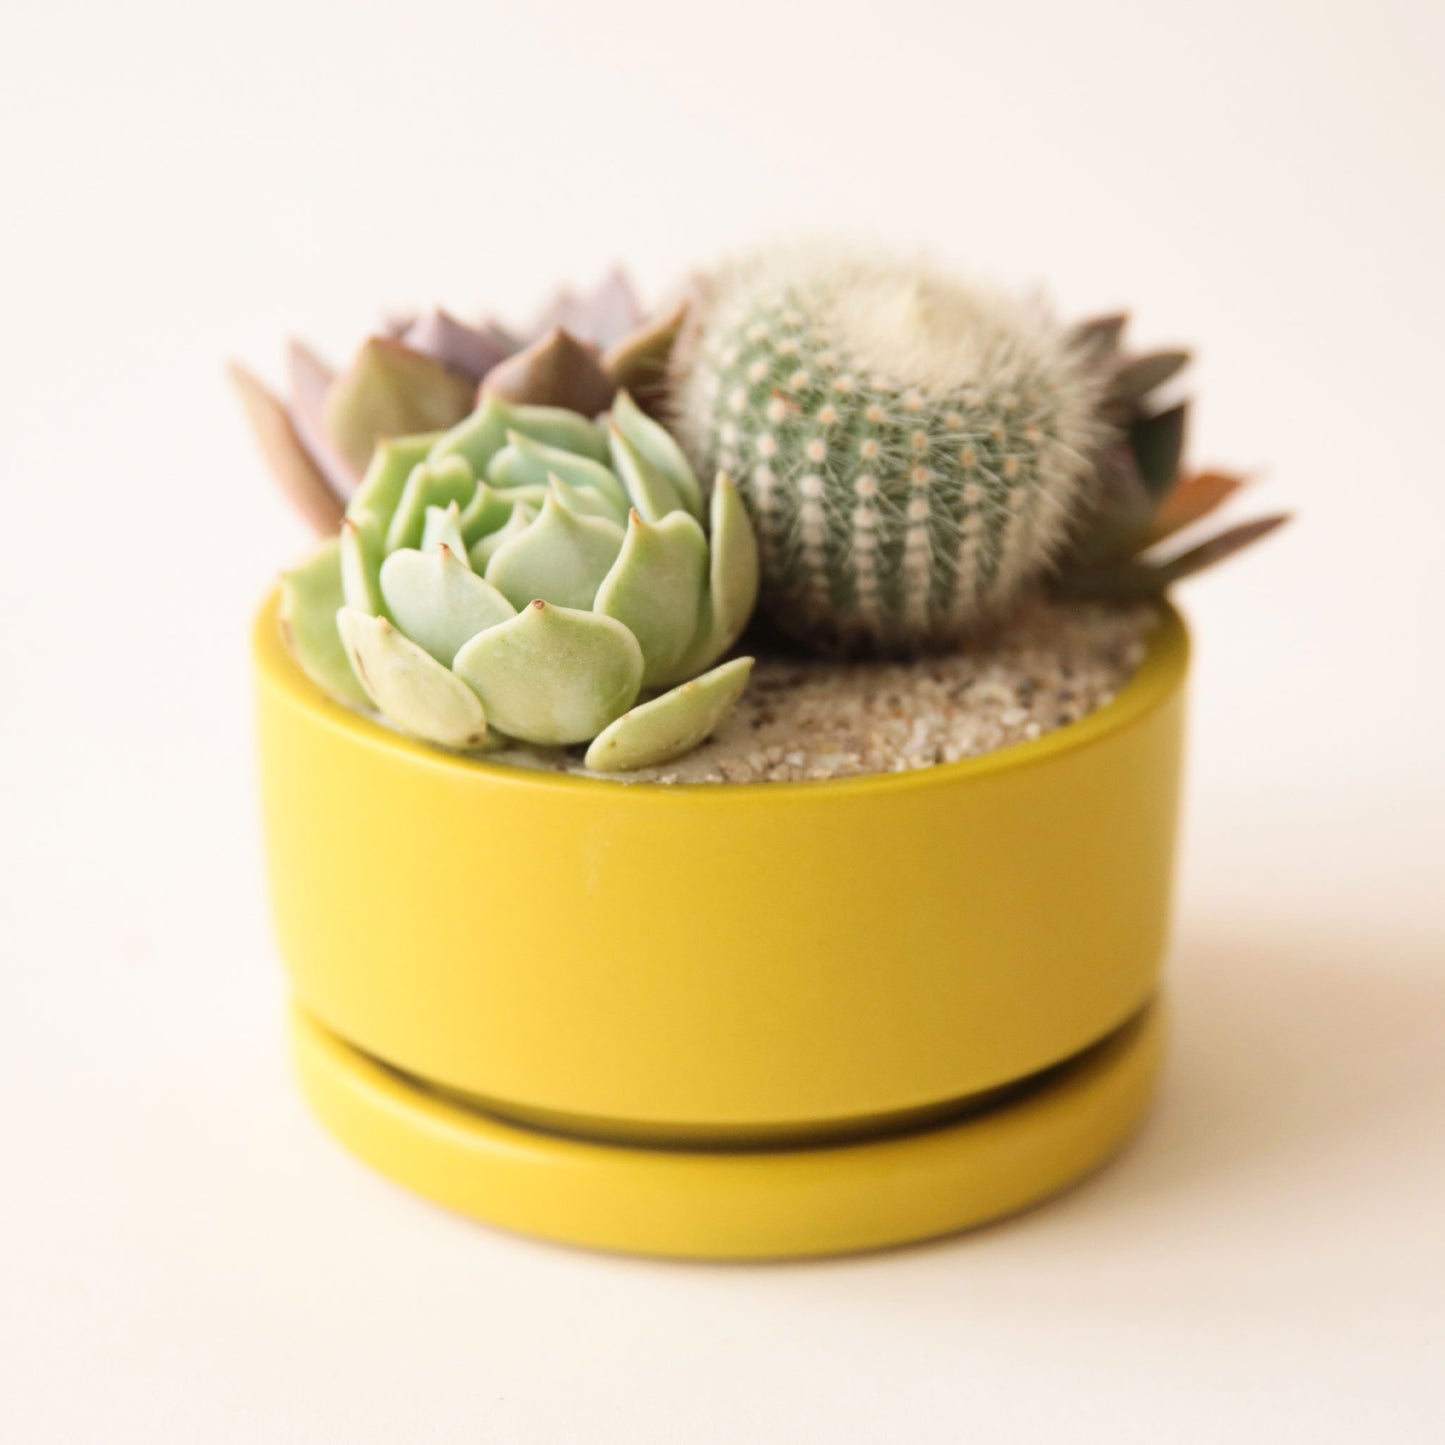 On a cream background is a chartreuse low profile ceramic planter with a removable tray for drainage and filled here with a succulent and cacti arrangement.